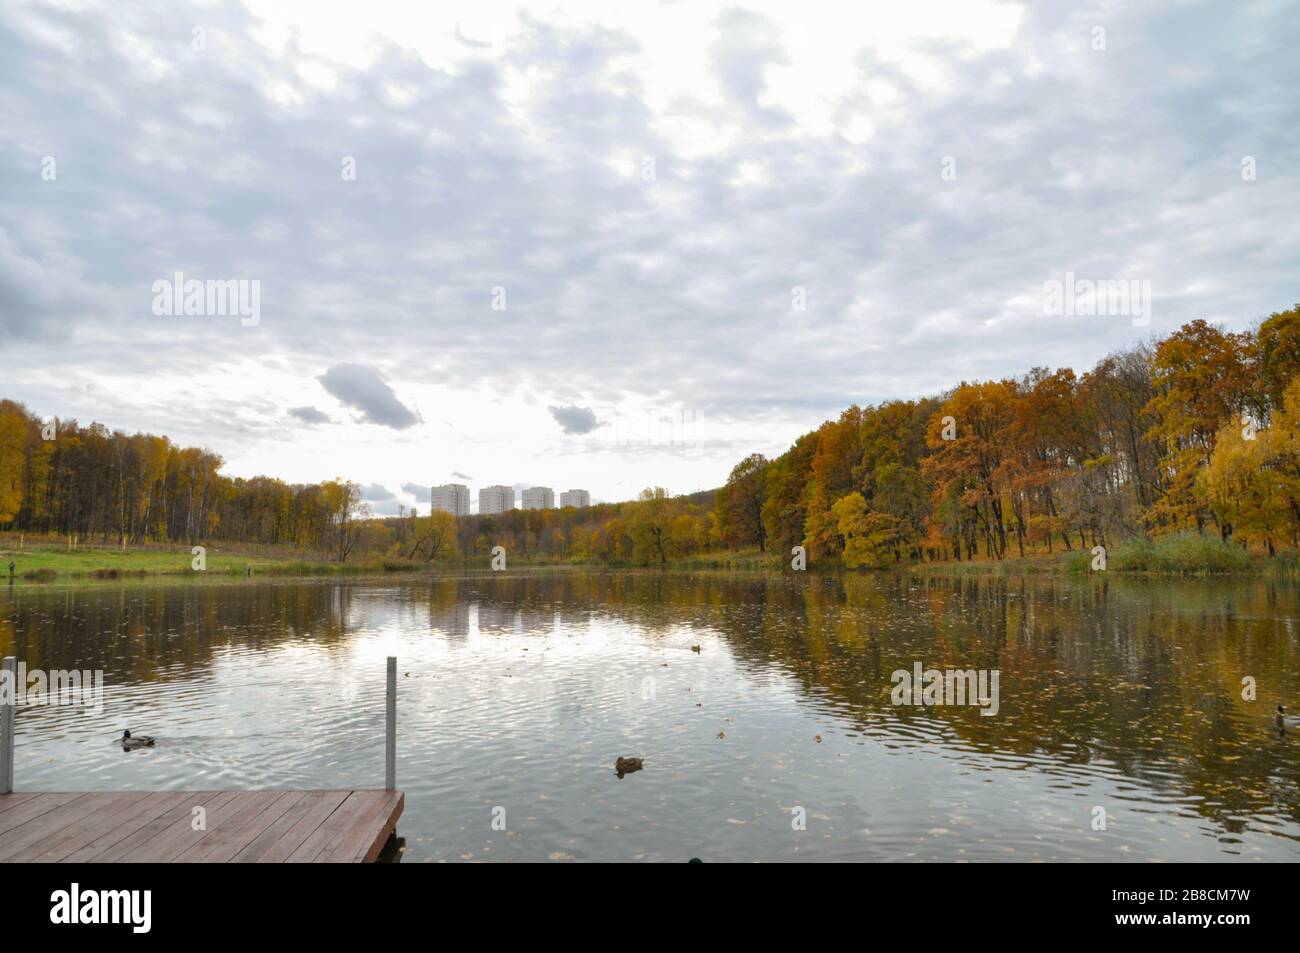 Landscape in cloudy october day with trees pond and part of wooden pier. Stock Photo